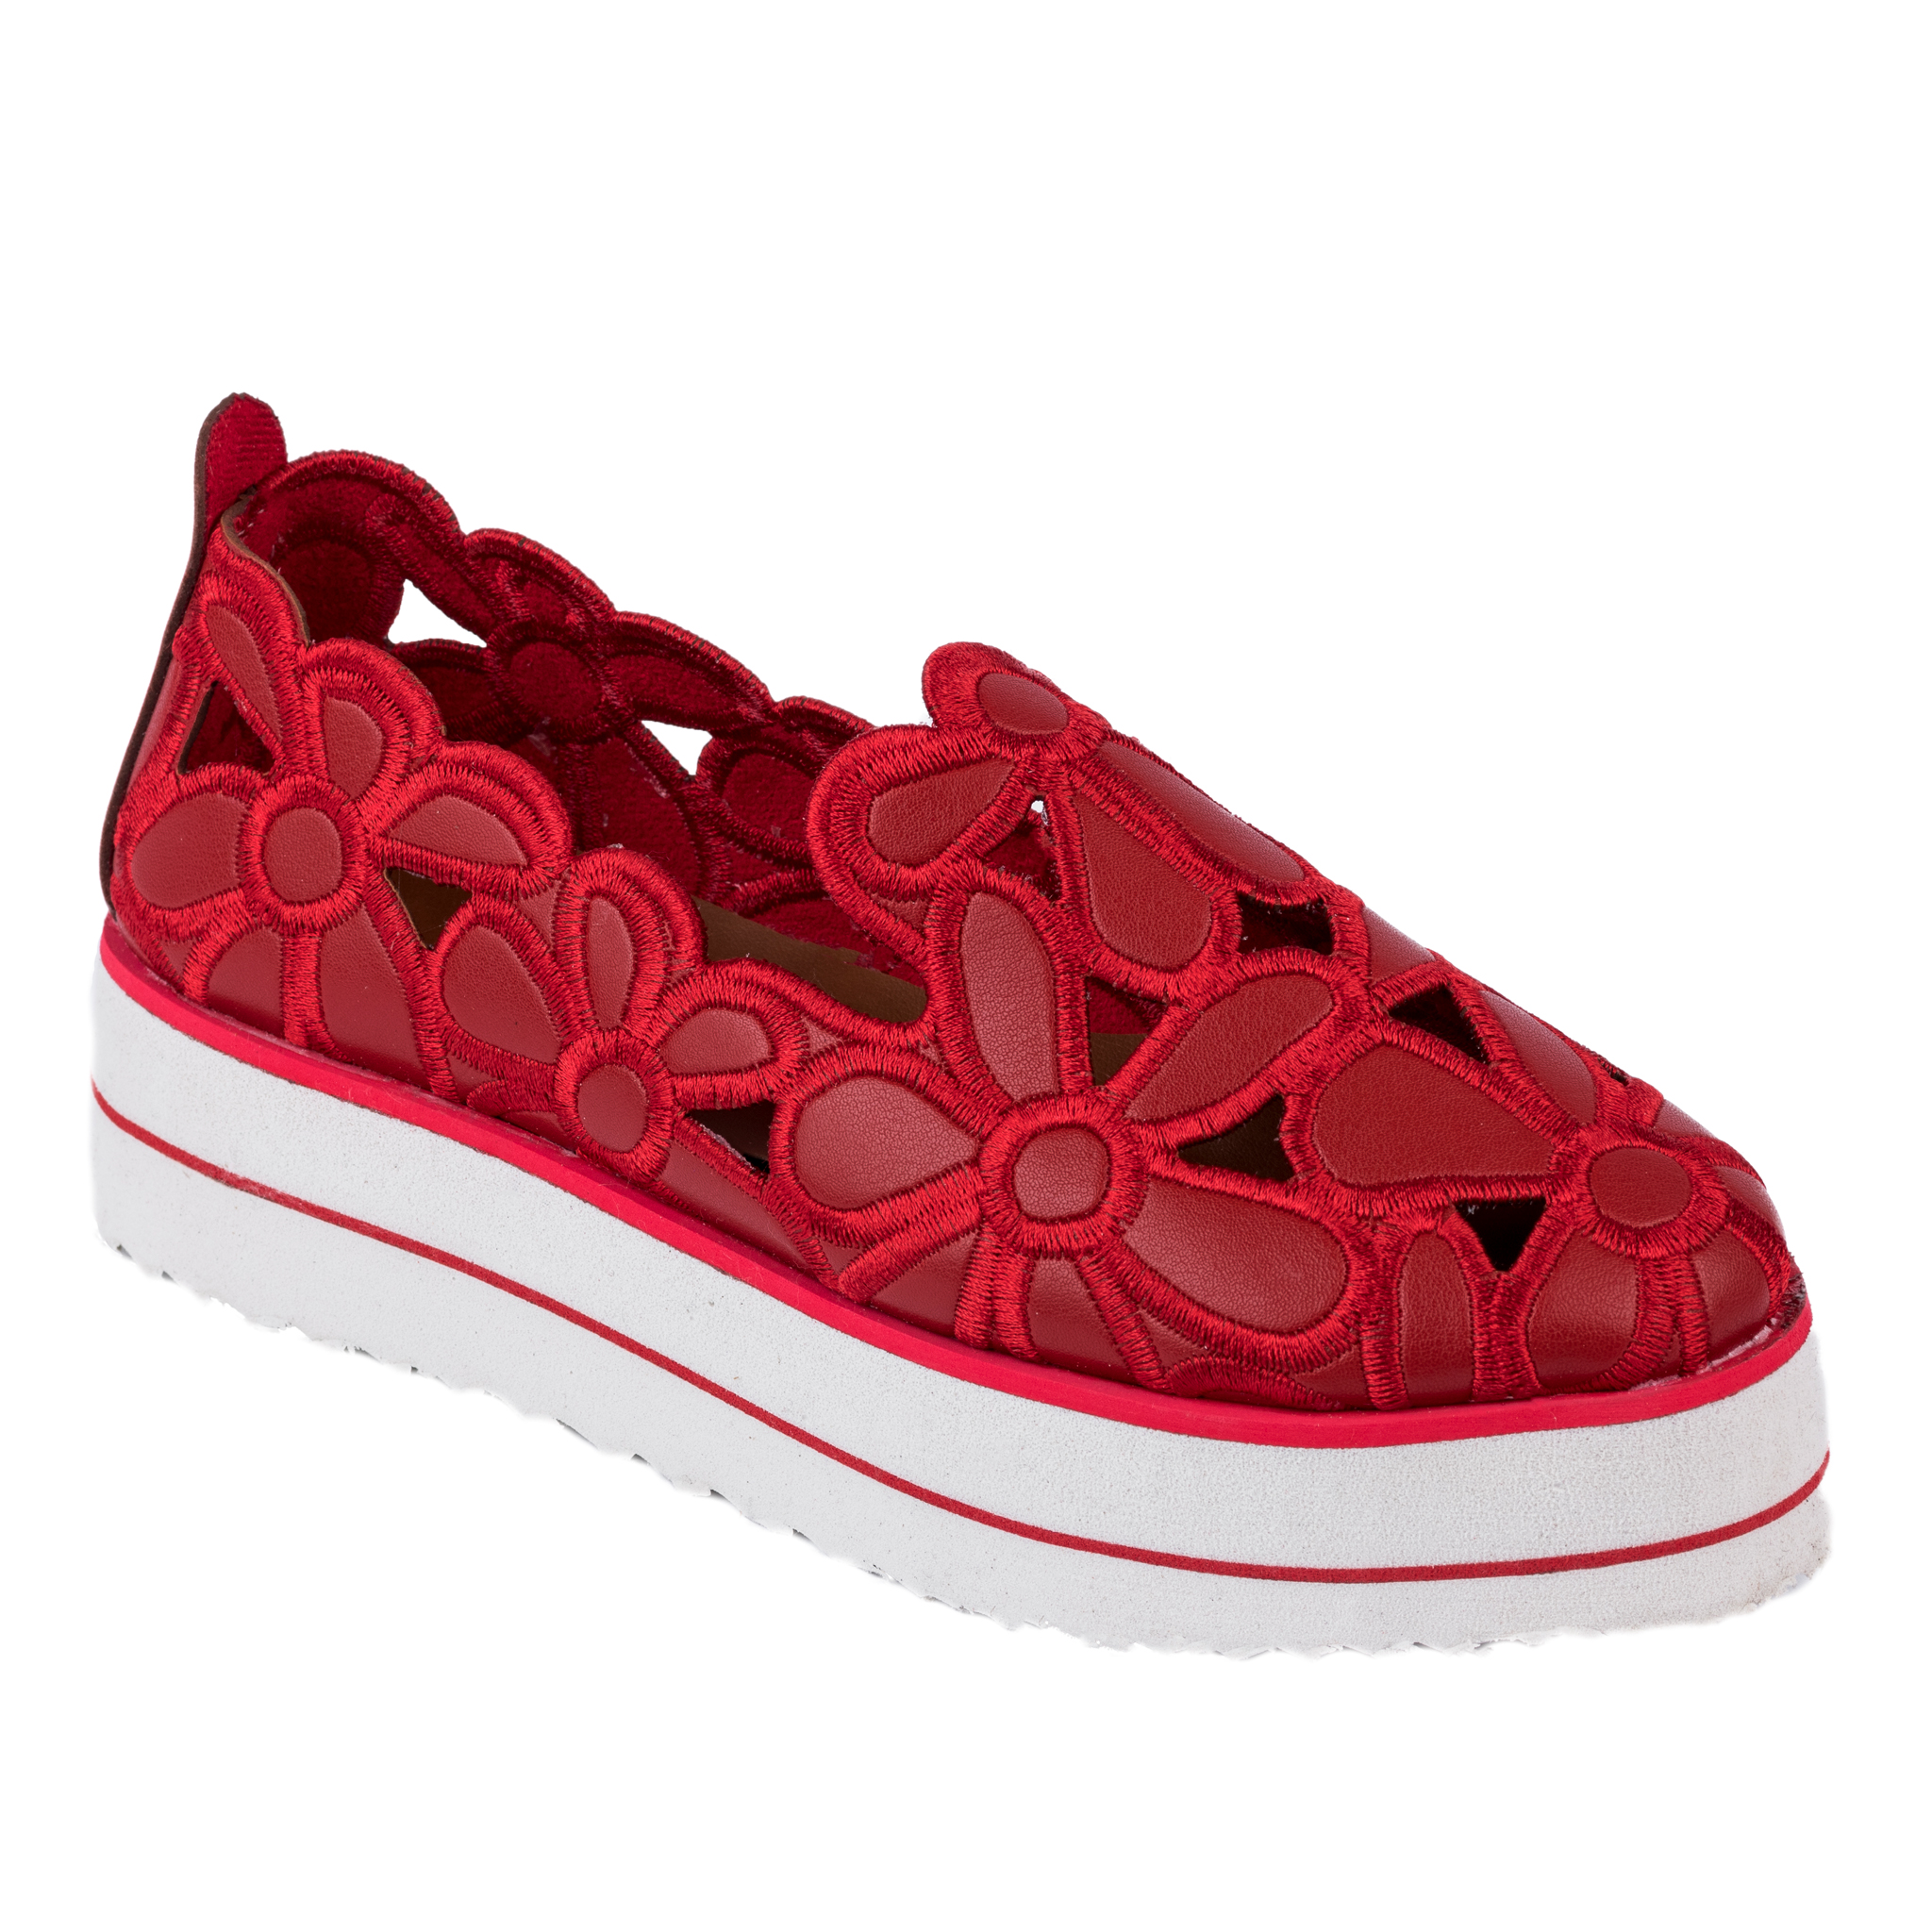 FLOWER PRINT SHOES WITH HIGH SOLE - RED